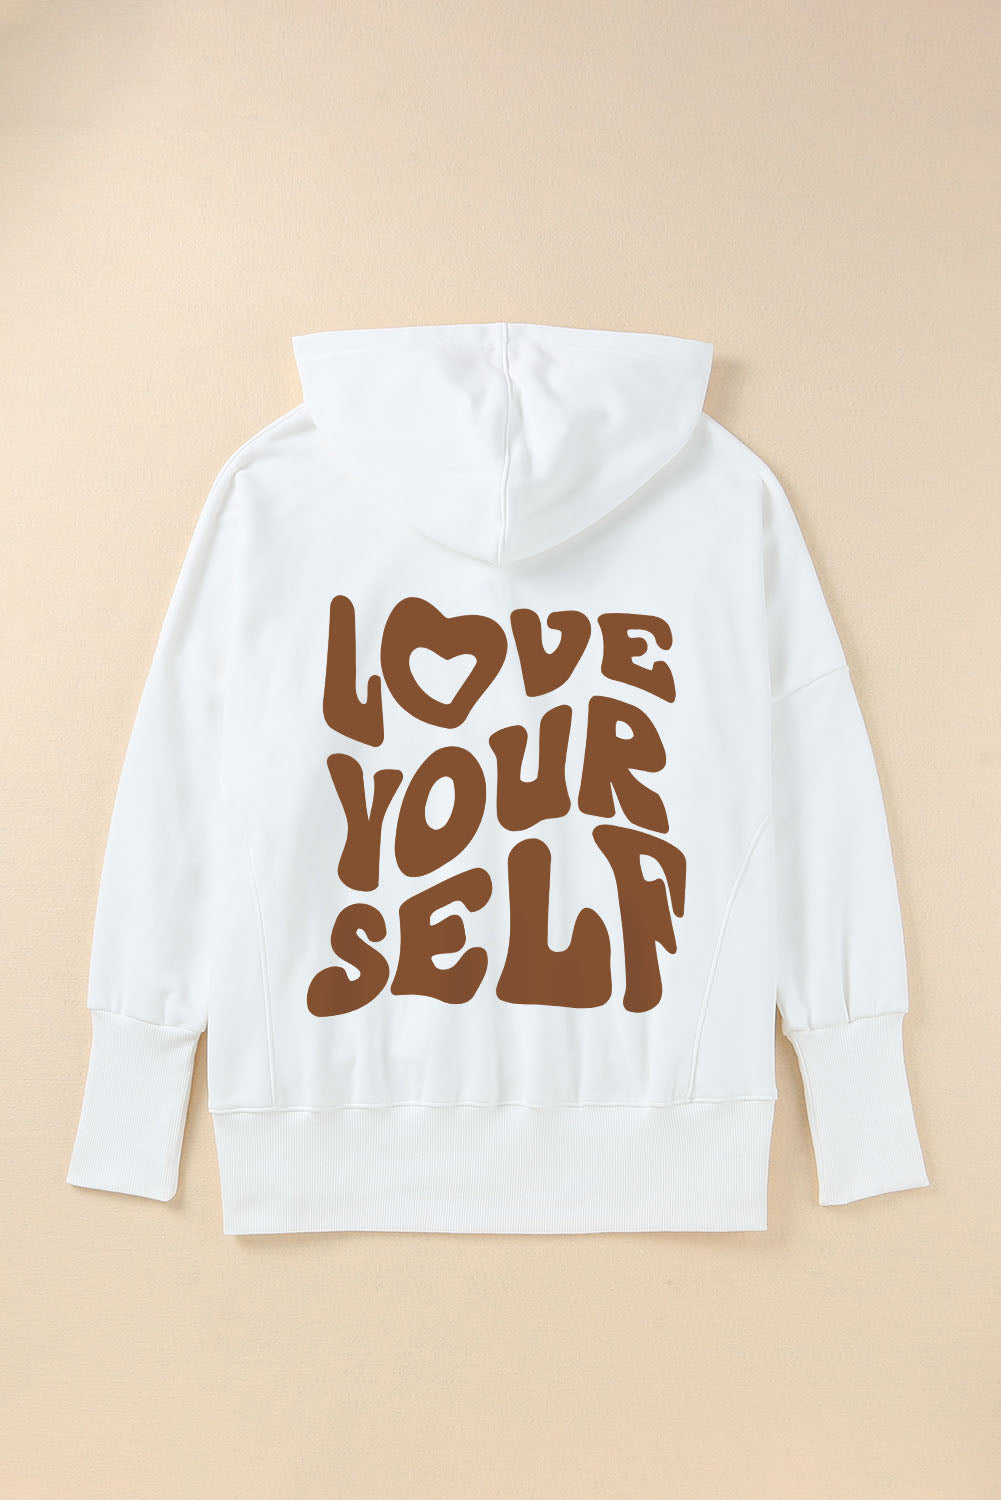 White LOVE YOURSELF Graphic Snap Buttons Pullover Hoodie Graphic Sweatshirts JT's Designer Fashion